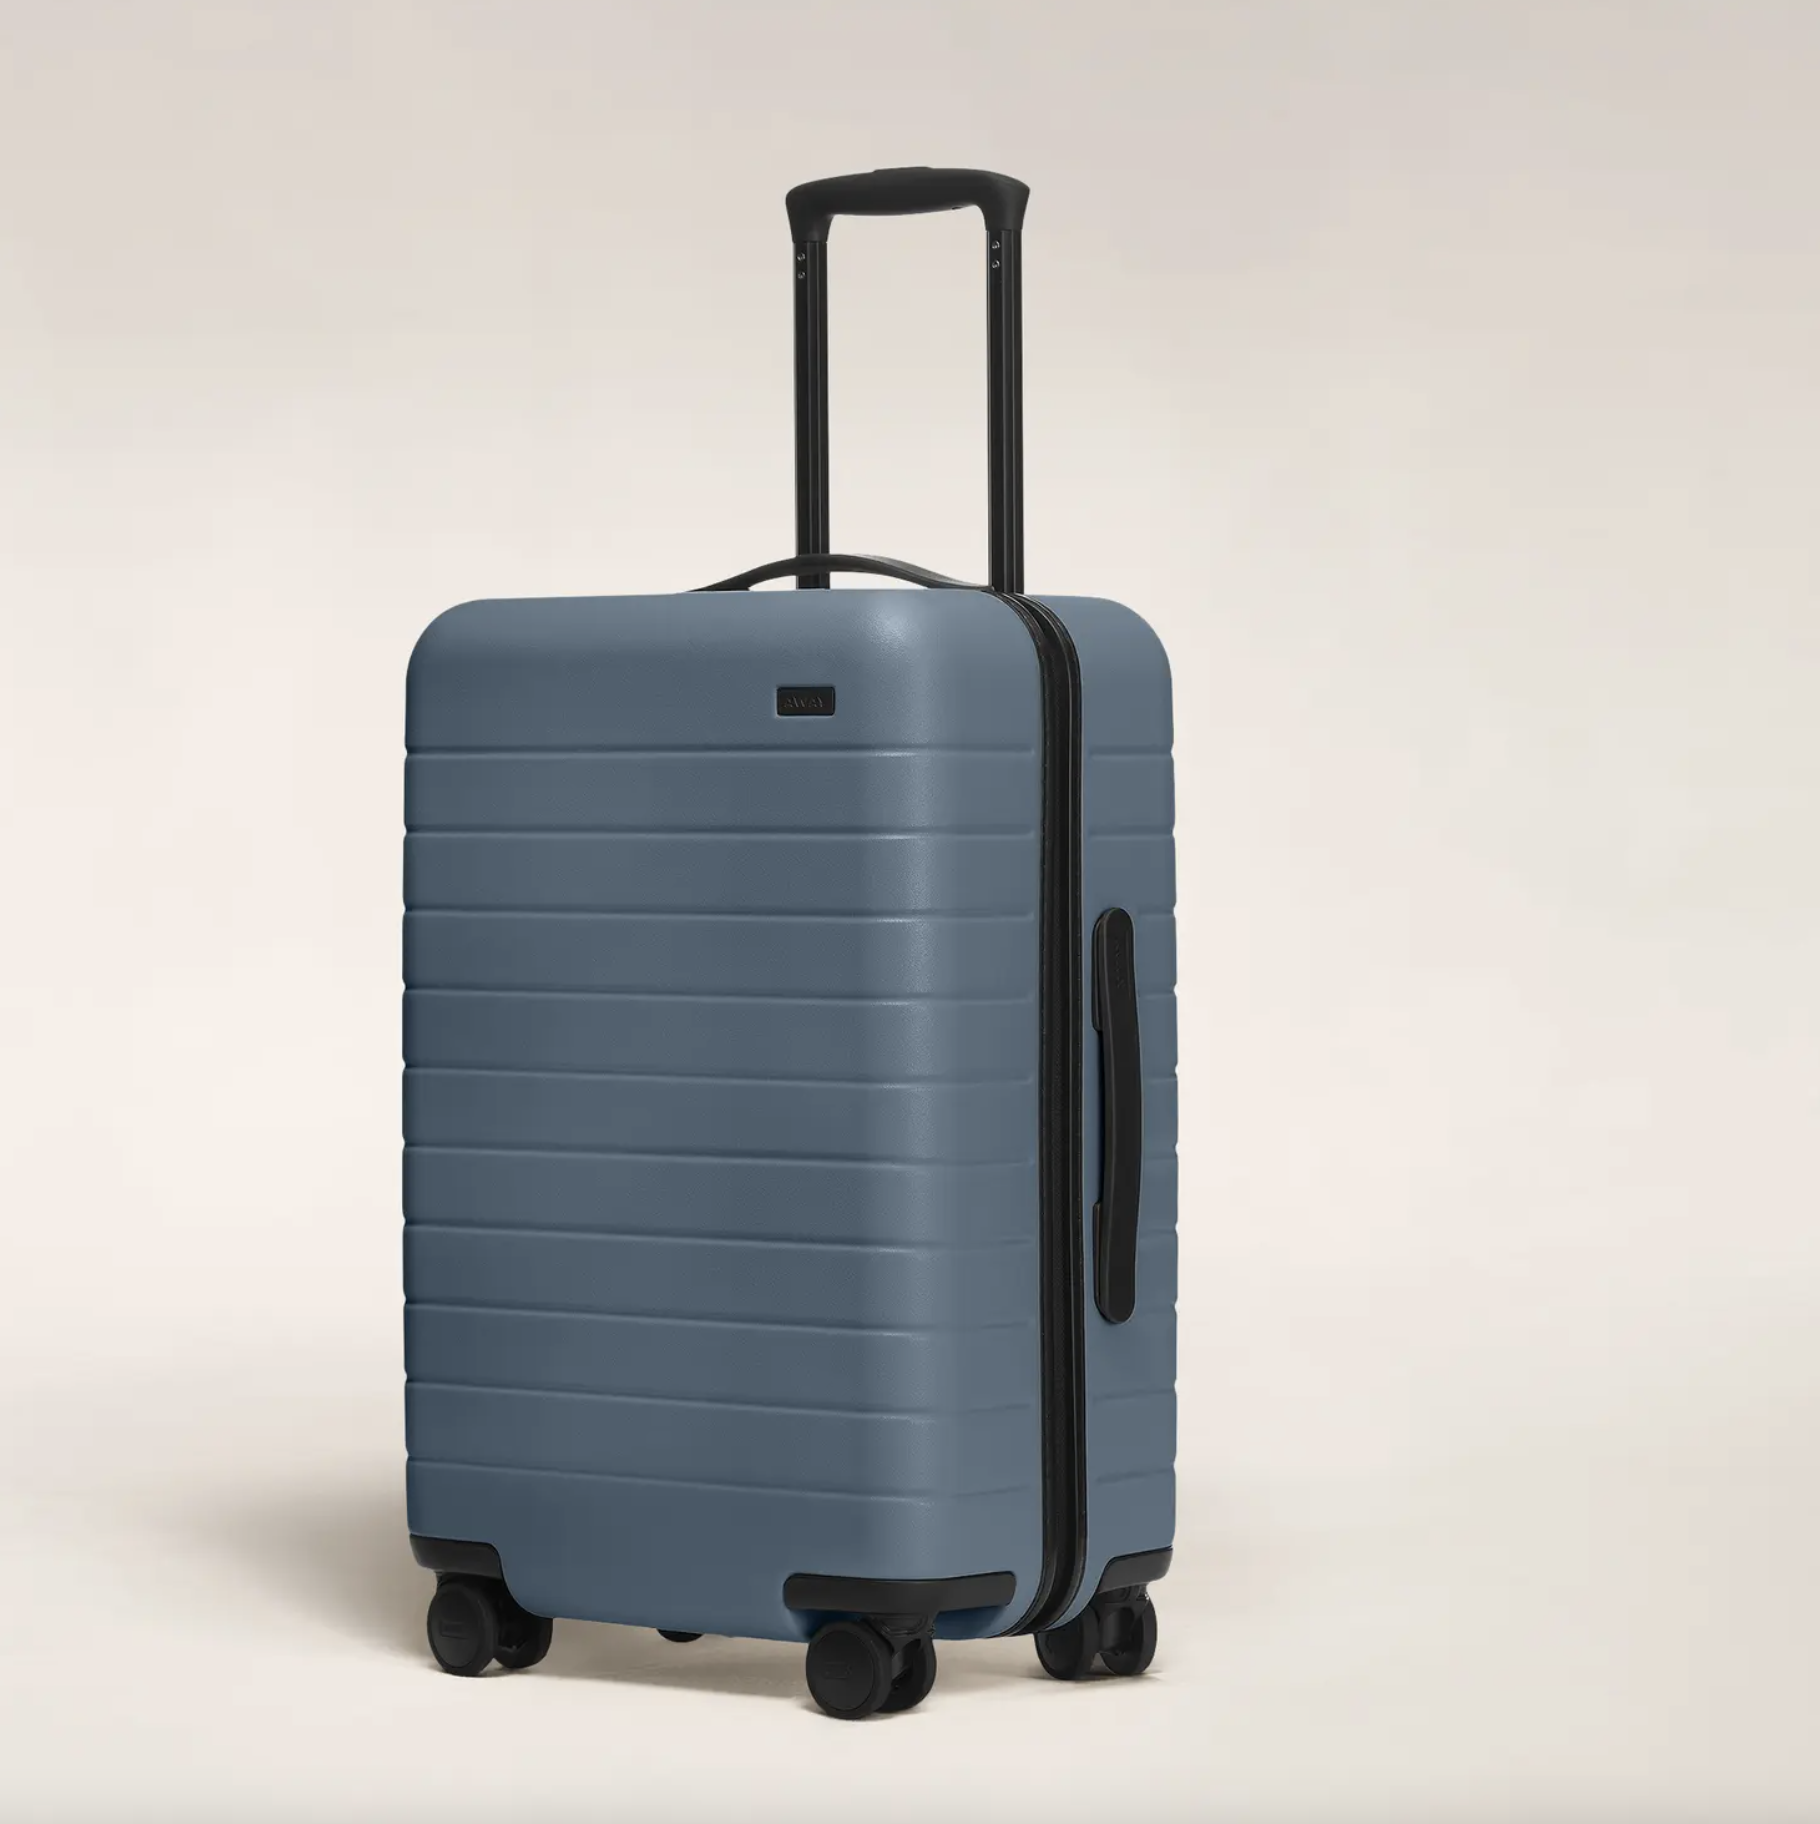 <p><strong>$315.00</strong></p><p>This cutie carry-on can hold just as much as your checked luggage, thanks to an interior compression system and a hidden laundry bag. It also features an ejectable USB charger, a lock for extra security, and a black leather luggage tag. </p><ul><li><strong>Return policy</strong>: 100 days </li><li><strong>Warranty: </strong>A <a href="https://go.redirectingat.com?id=74968X1553576&url=https%3A%2F%2Fwww.awaytravel.com%2Fwarranty&sref=https%3A%2F%2Fwww.cosmopolitan.com%2Flifestyle%2Fg26931124%2Fbest-luggage-brands%2F">limited lifetime guarantee</a> that covers any functional damage to the shell, wheels, handles, zippers, or anything else that impairs your use of the luggage.</li></ul><p><em><strong>THE REVIEWS:</strong> "After three years of contemplating, I finally purchased the Away Carry-On suitcase in blush. Can I just say, 'OMG!!!!' My pet peeve with my other suitcases (who will remain unnamed) is that they ALWAYS “flip/have a blowout” while I am wheeling them through the airport, along cobblestones in Dubrovnik, gravel in Greece, etc. My Away suitcase rolls smooth and rough terrain without a problem, and no more flipping over," one reviewer writes. "Other reasons to love it include color, easy to clean, the interior layout, ease of locking/use, and it seems to fit in all overhead bins (even on smaller planes). Almost forgot, I also have the matching TECH case…..LOVE!!!!!!"</em></p>